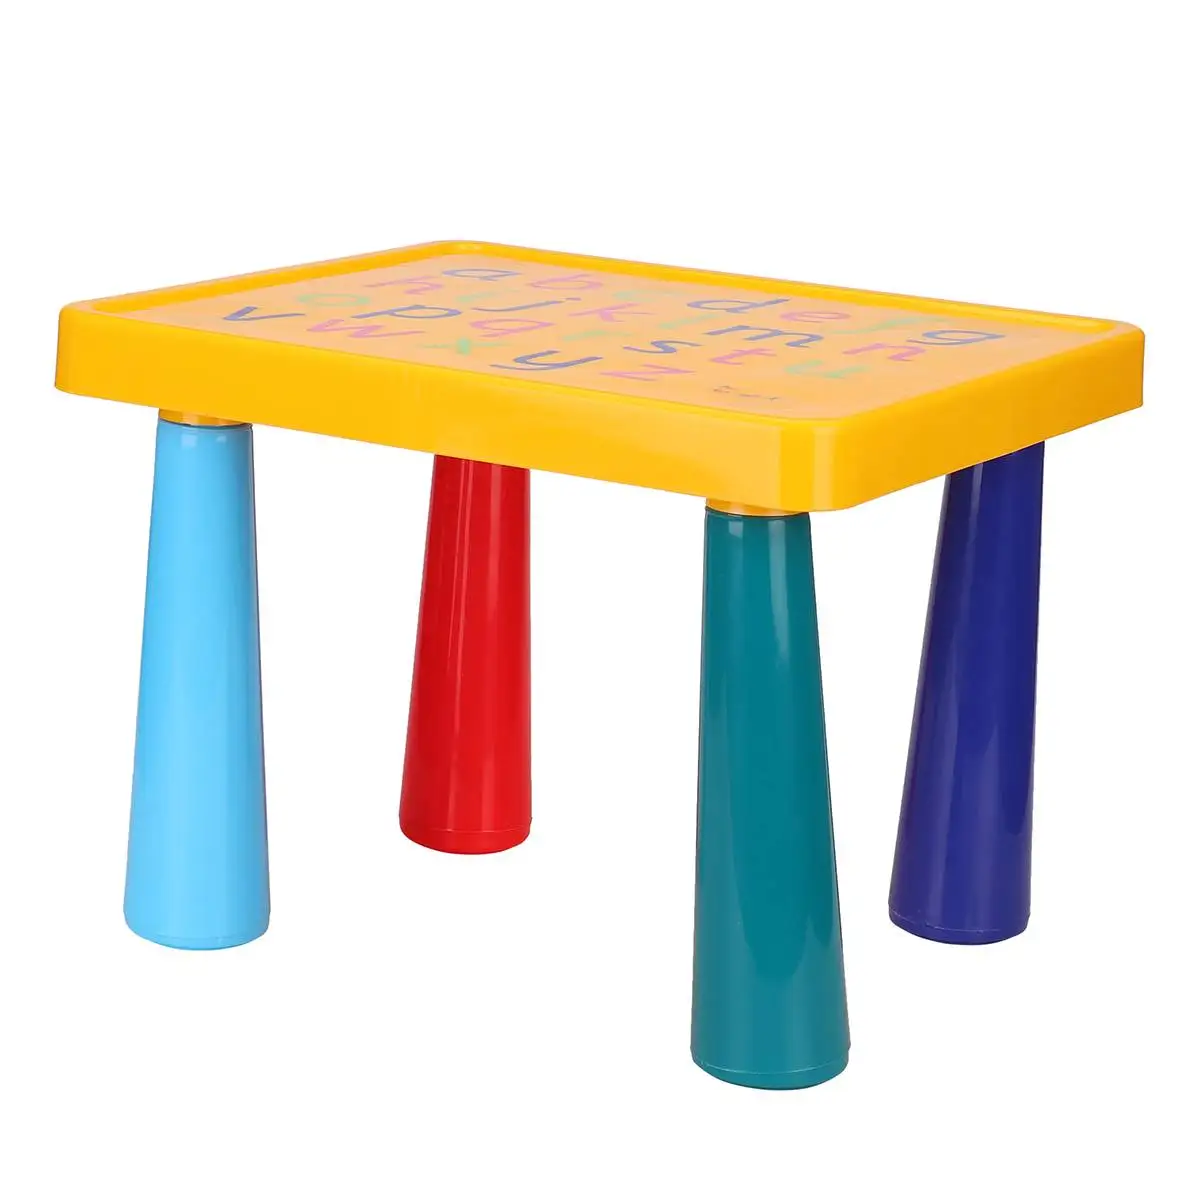 Children Chair Table Set Plastic Kids Play Study Desk Colorful Activity Writing Student Furniture Folding Children Furniture Set